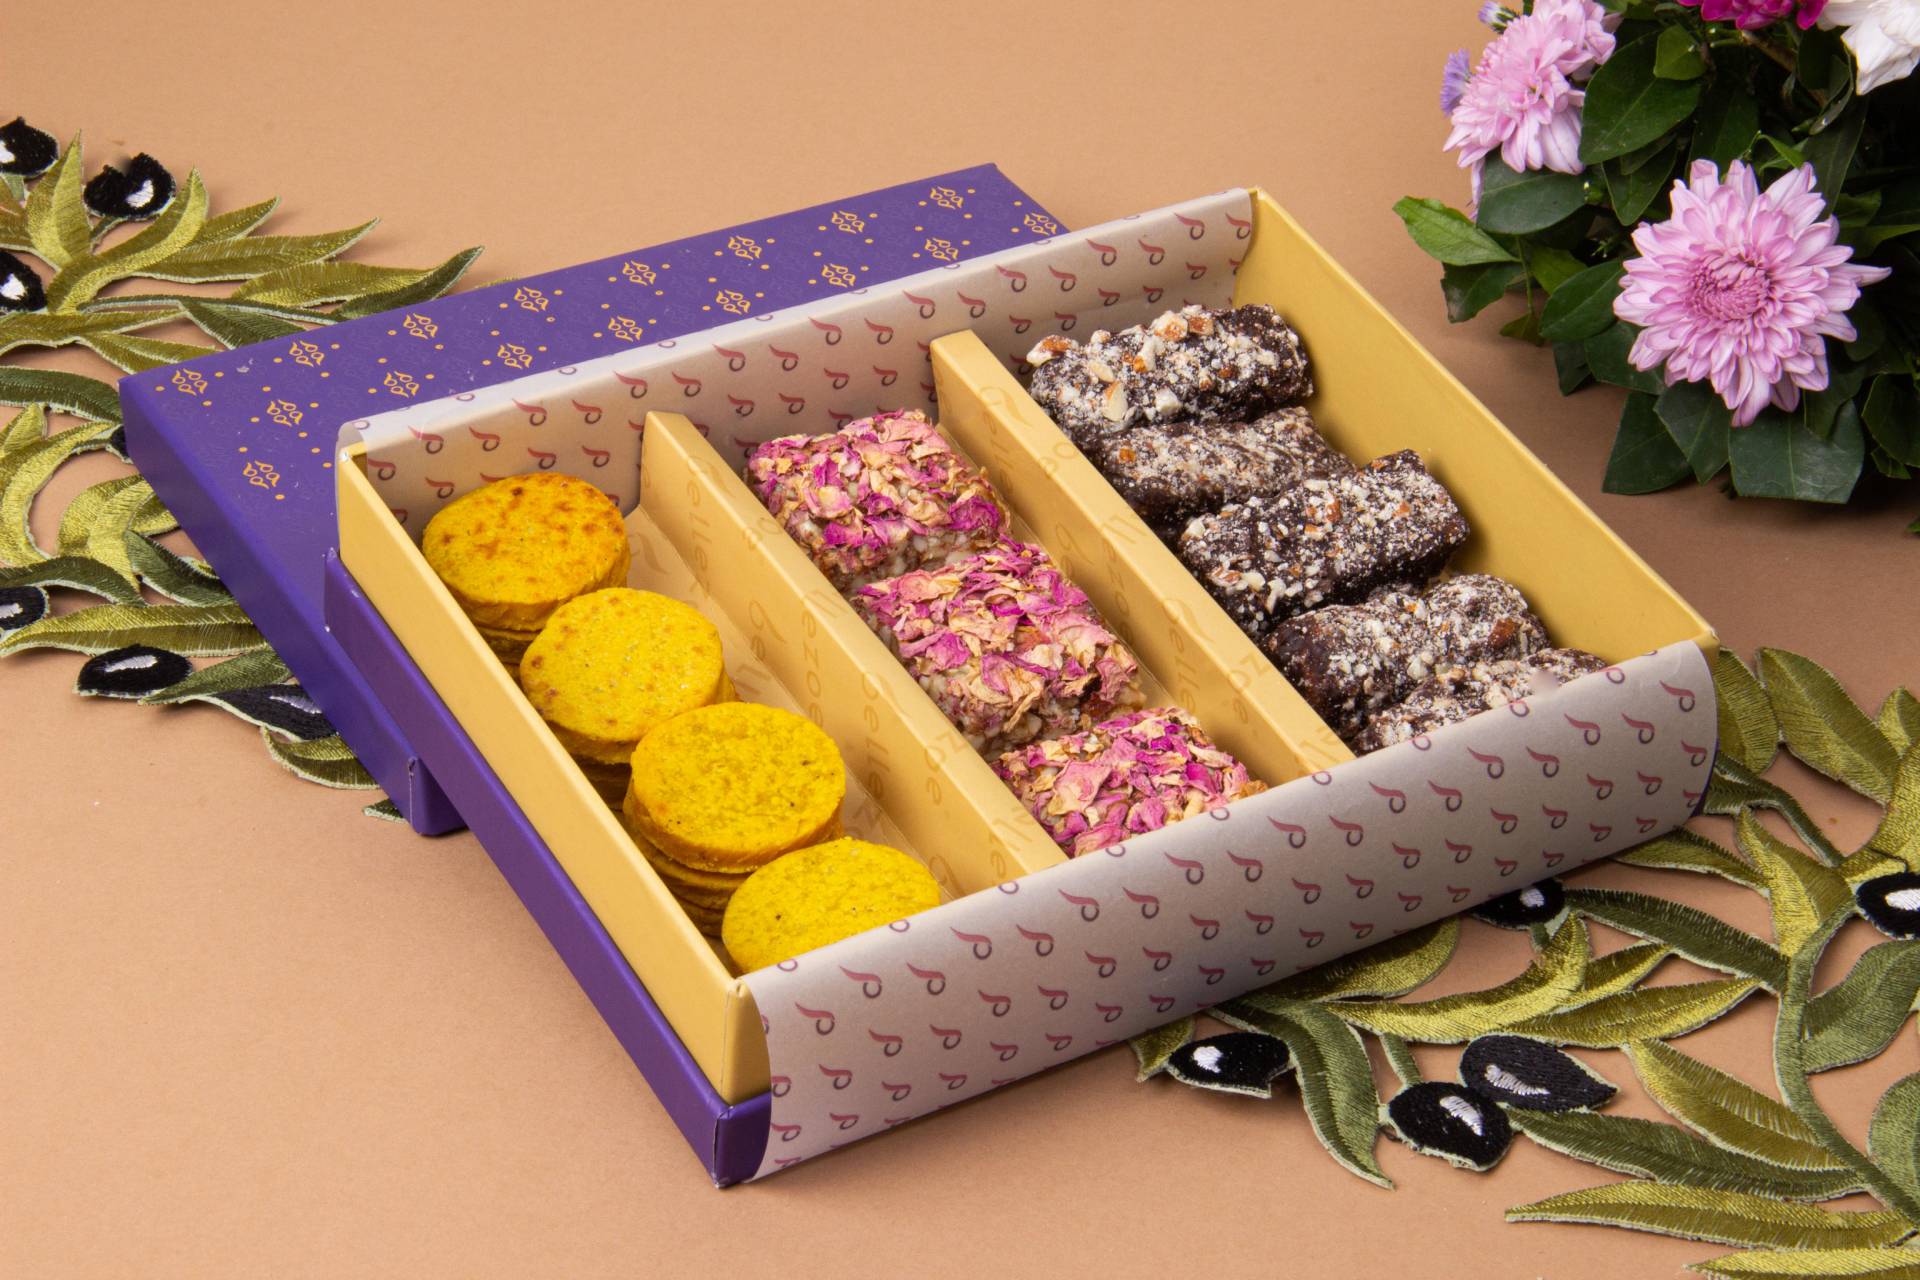 Diwali Sweets Gift Box contains: 200g each of Kaju Katli & Kachori with a  Set of 2 Lotus Wooden Candle Stand. – RawFruit®